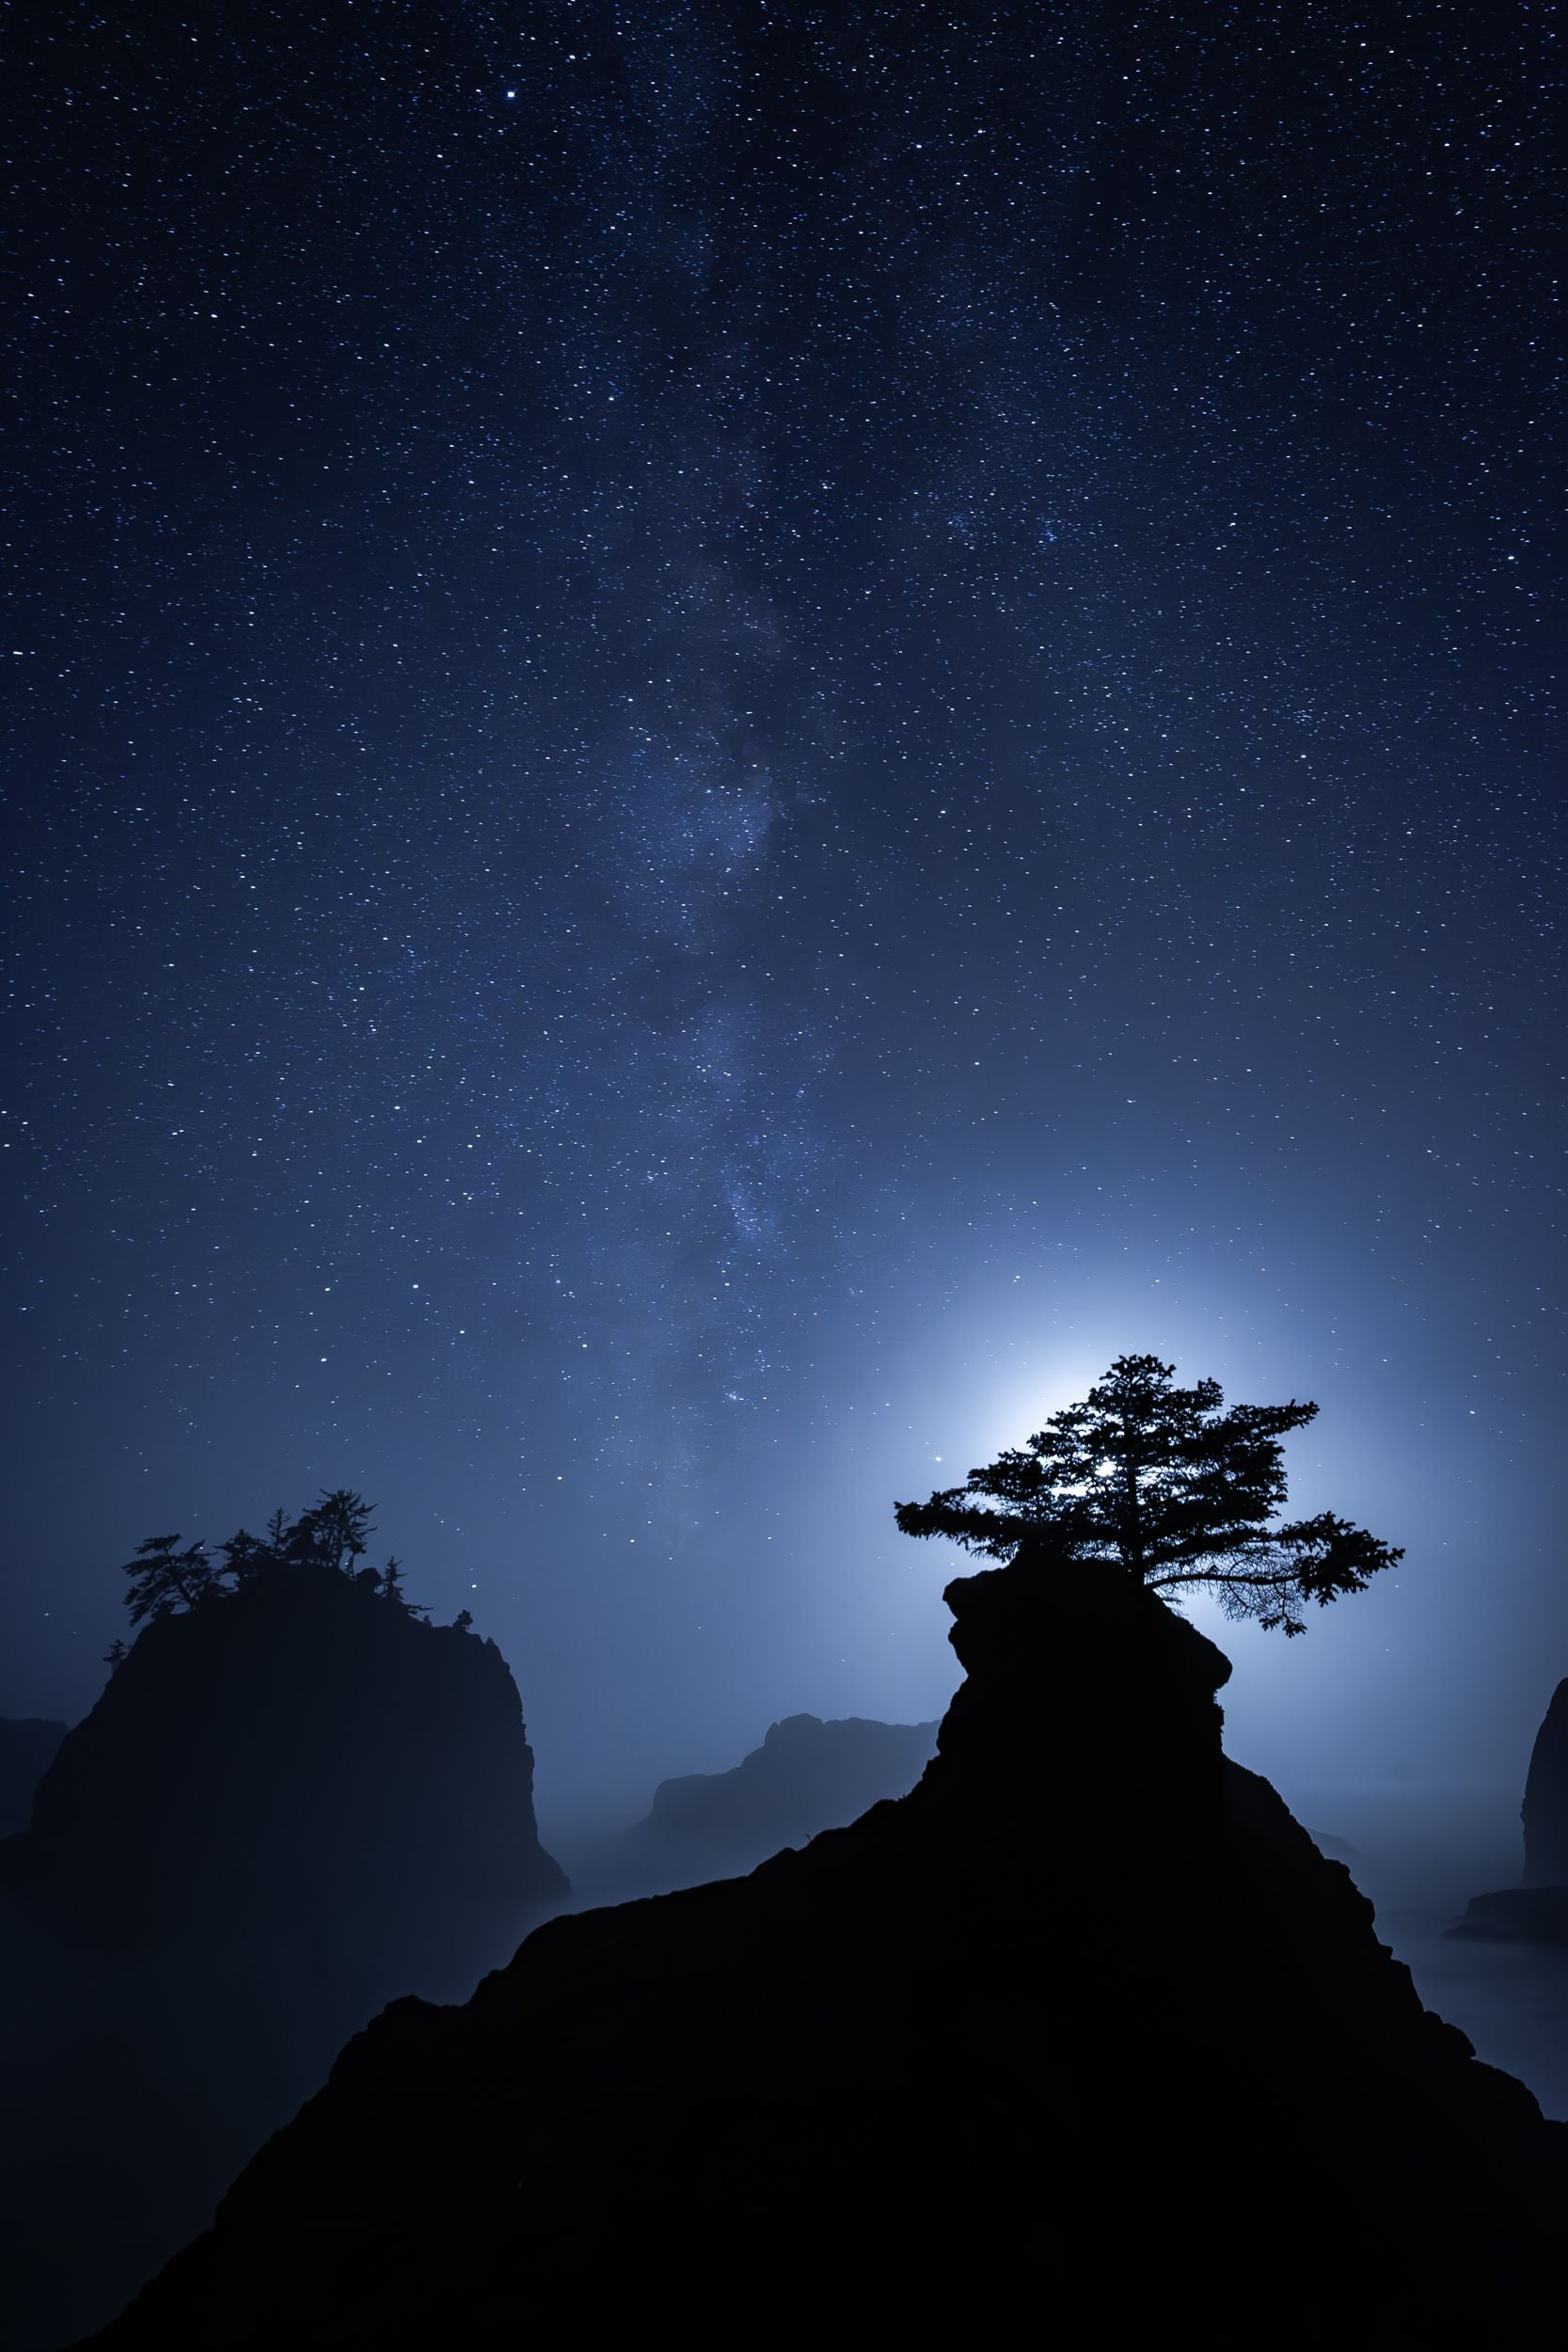 The Milky Way lights up the night sky and coastal trees are silhouettes along the shore.